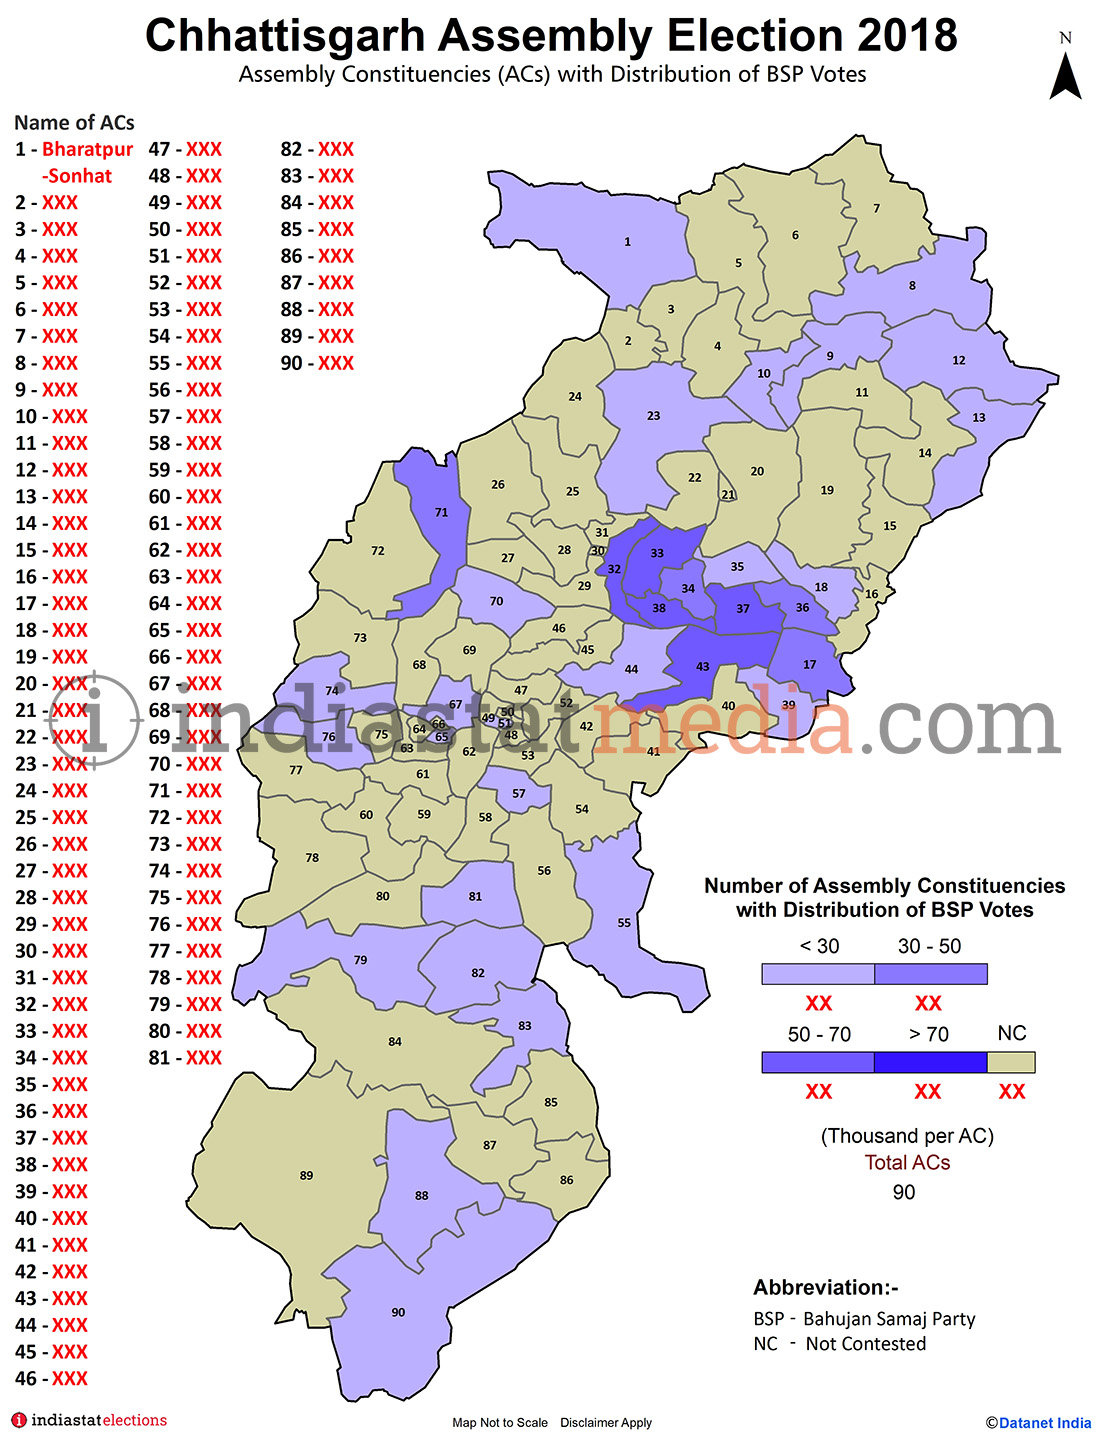 Distribution of BSP Votes by Constituencies in Chhattisgarh (Assembly Election - 2018)